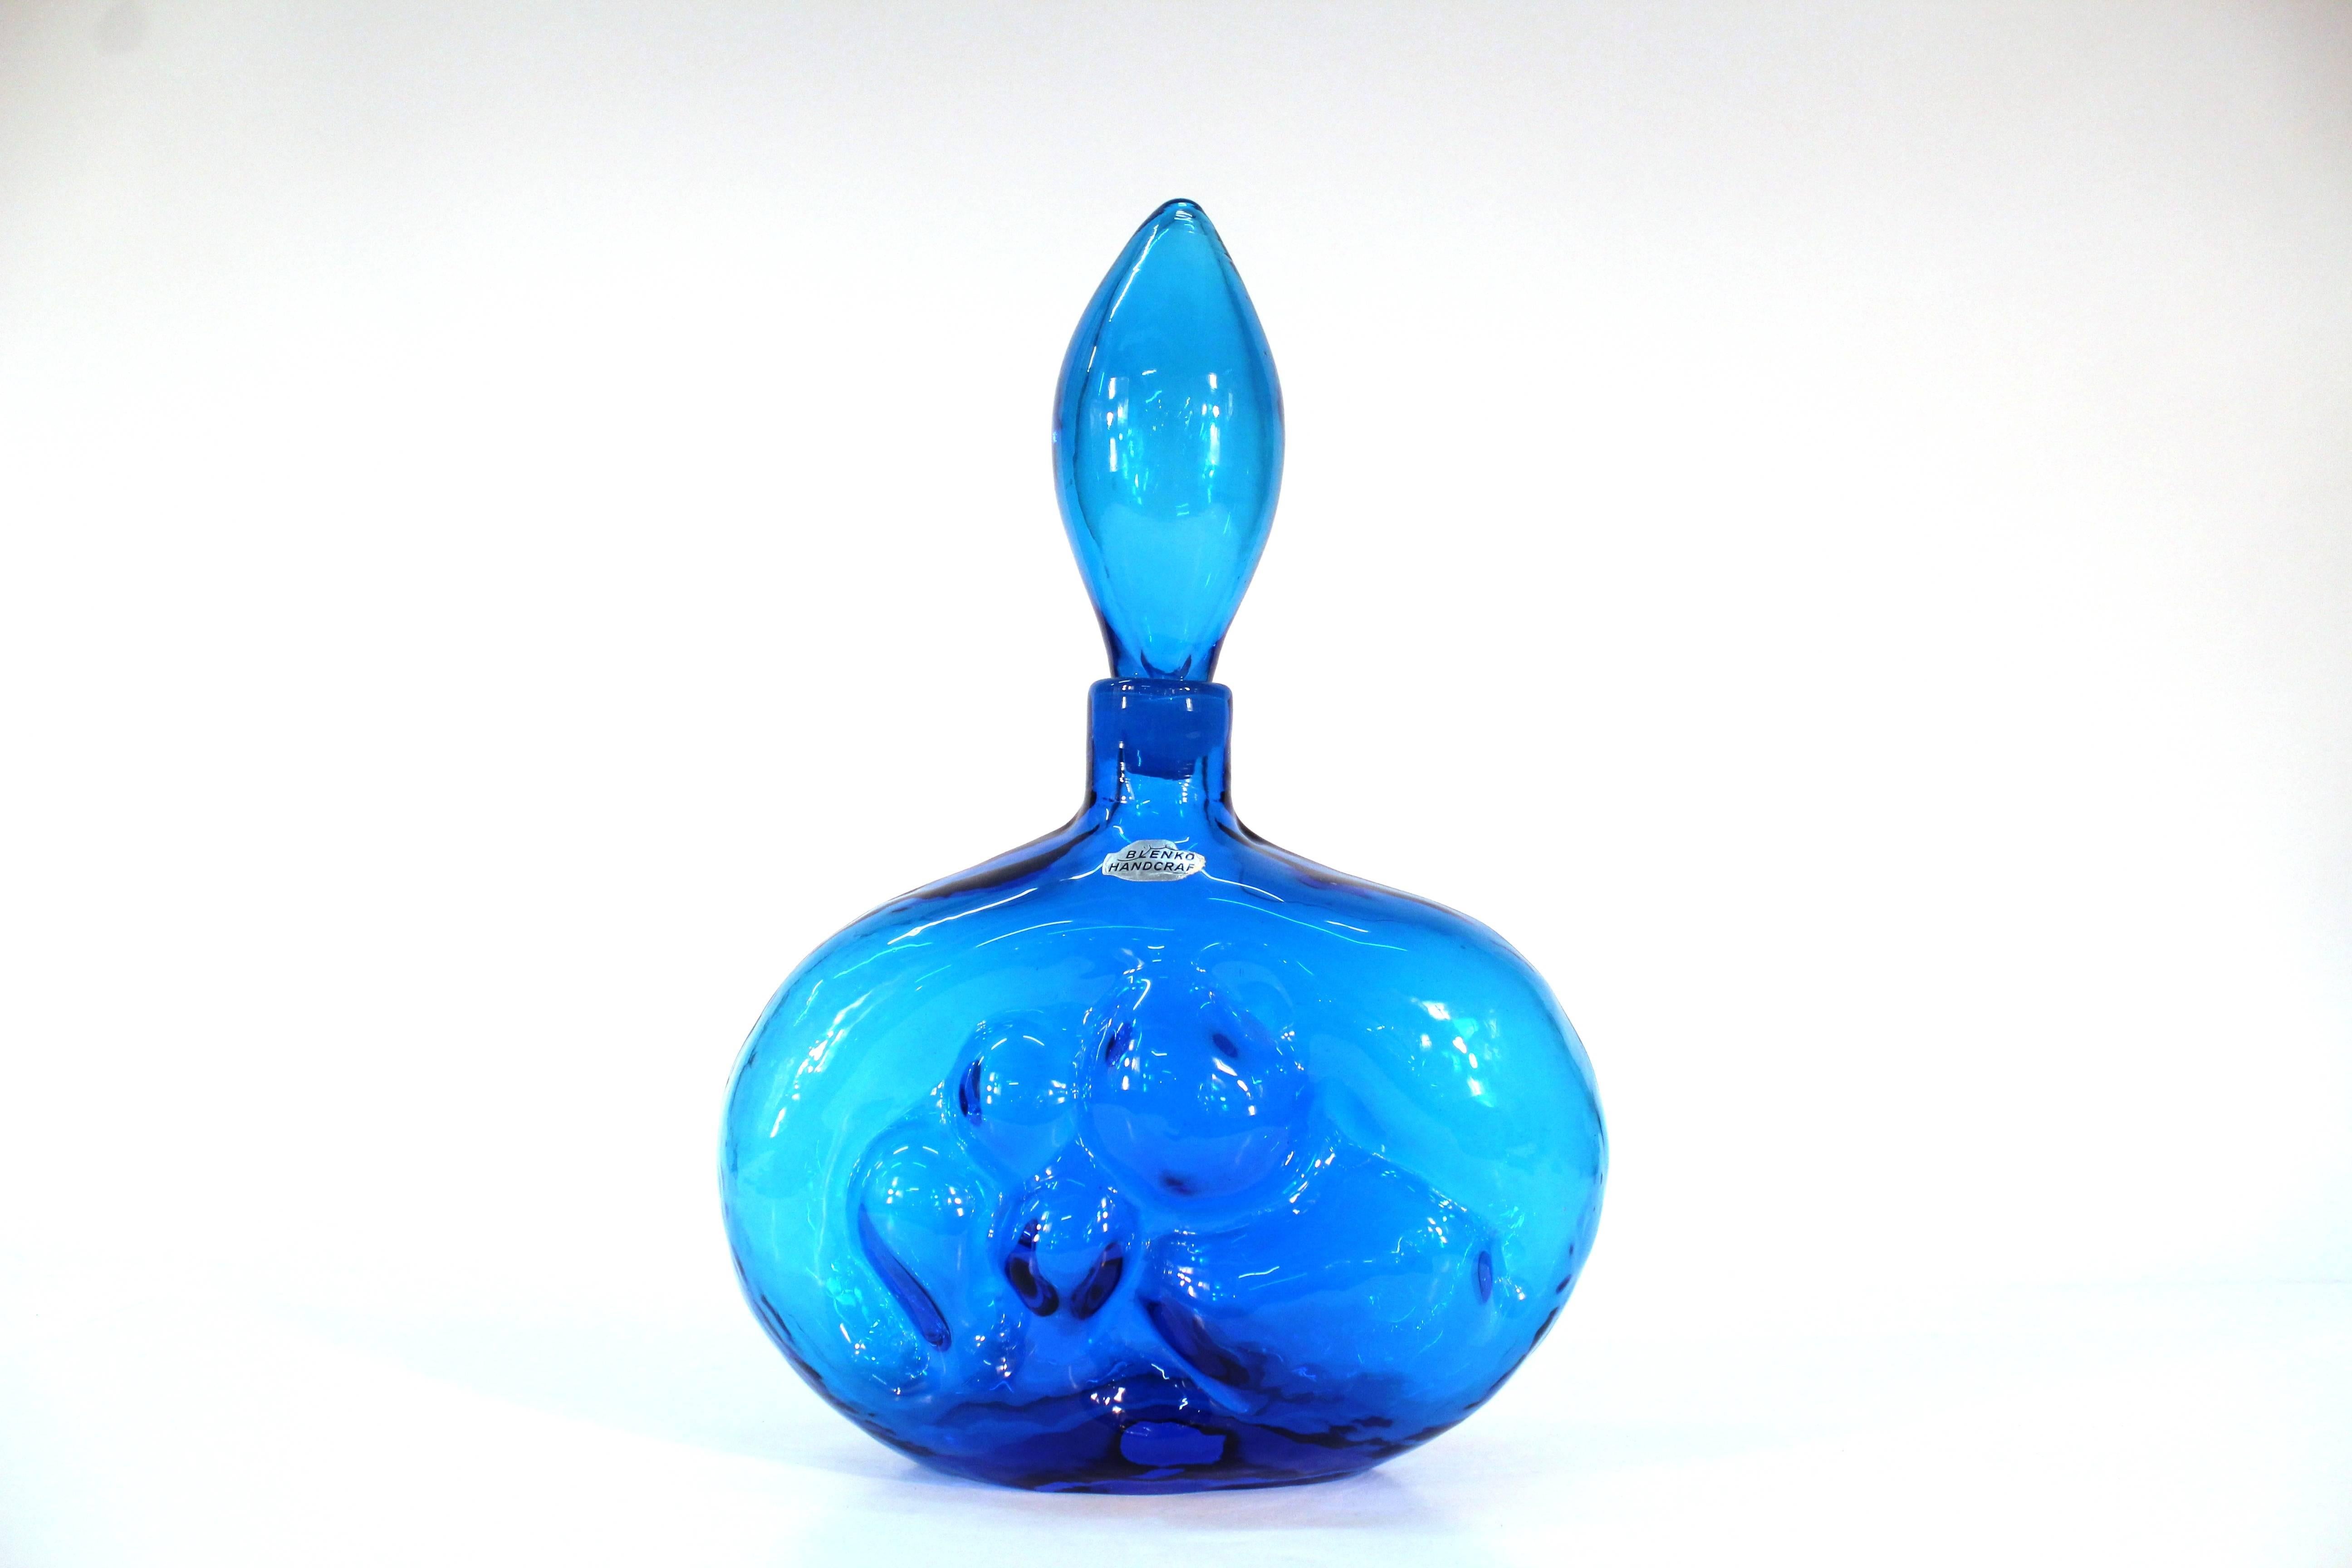 American Collection of Five Blenko Blown Glass Pieces